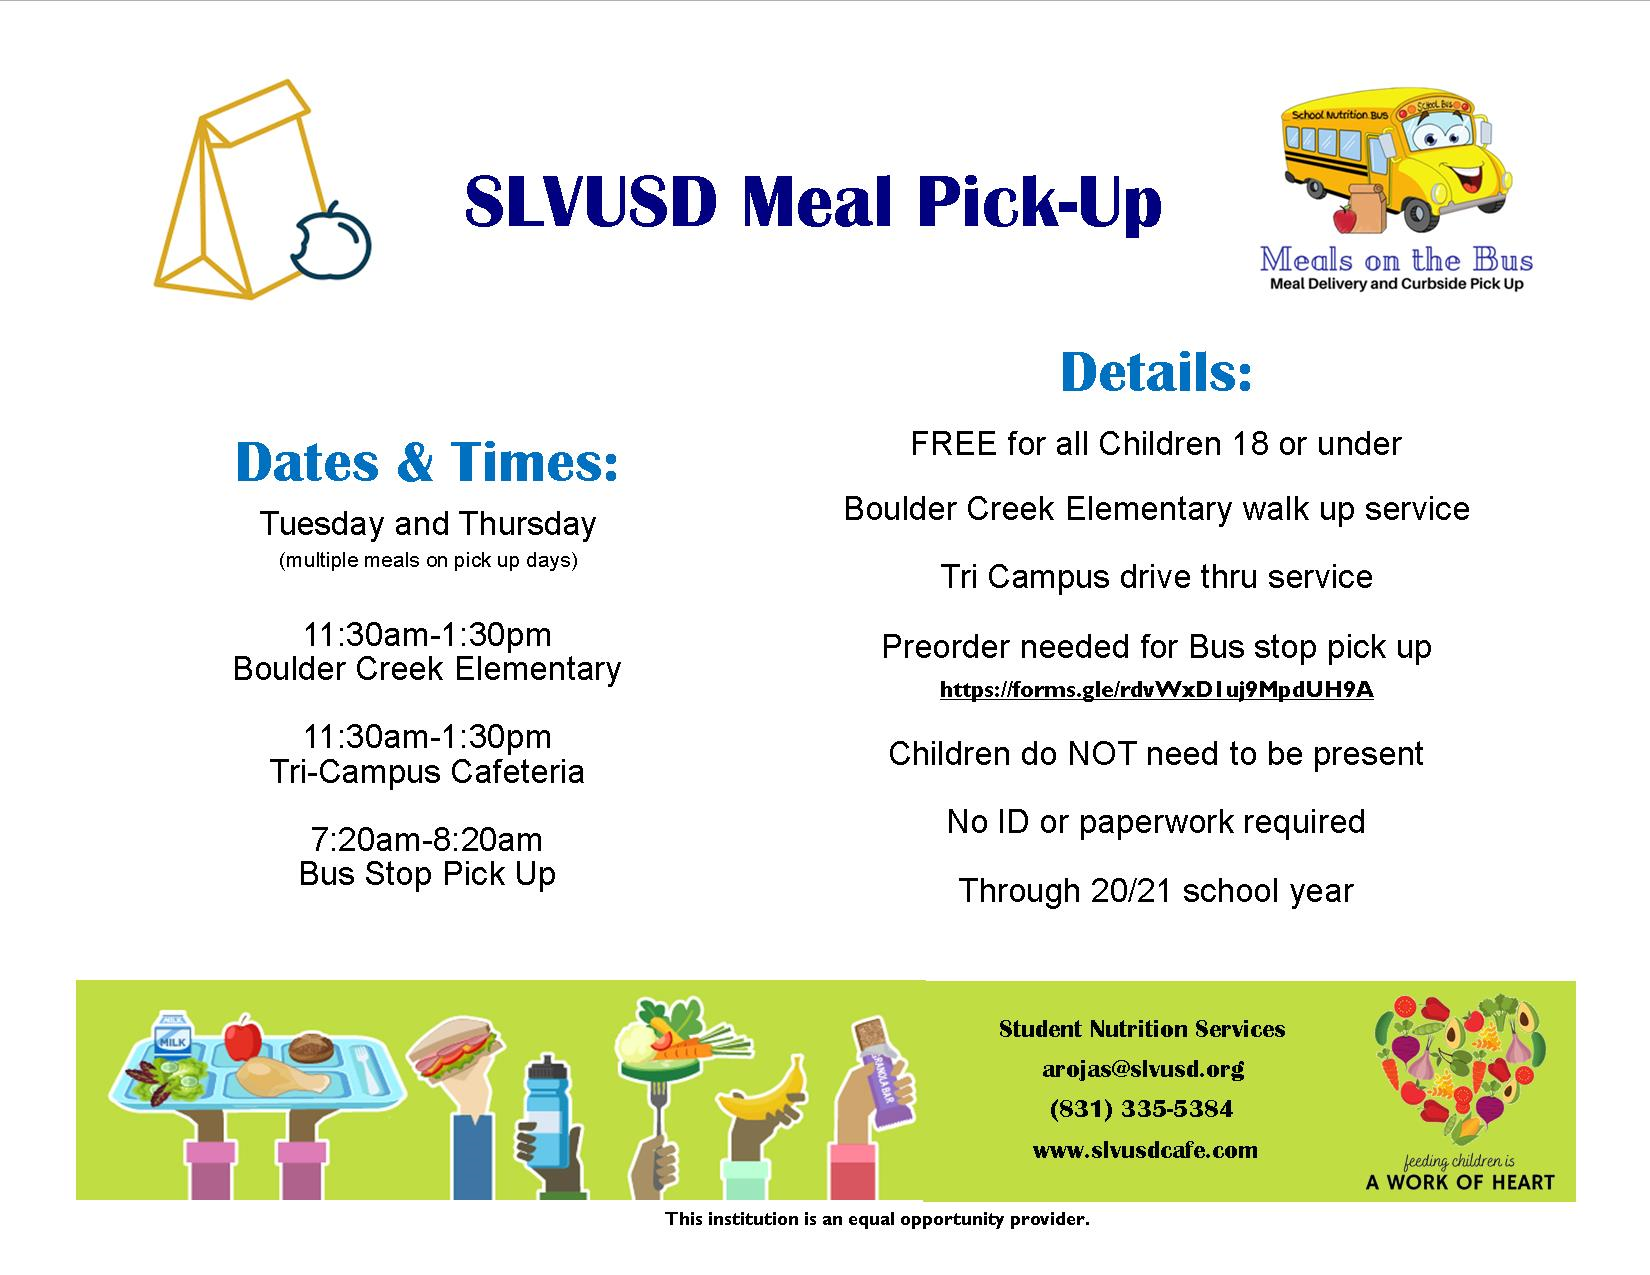 SLVUSD Meal Pick-up; for details call 831-335-5384